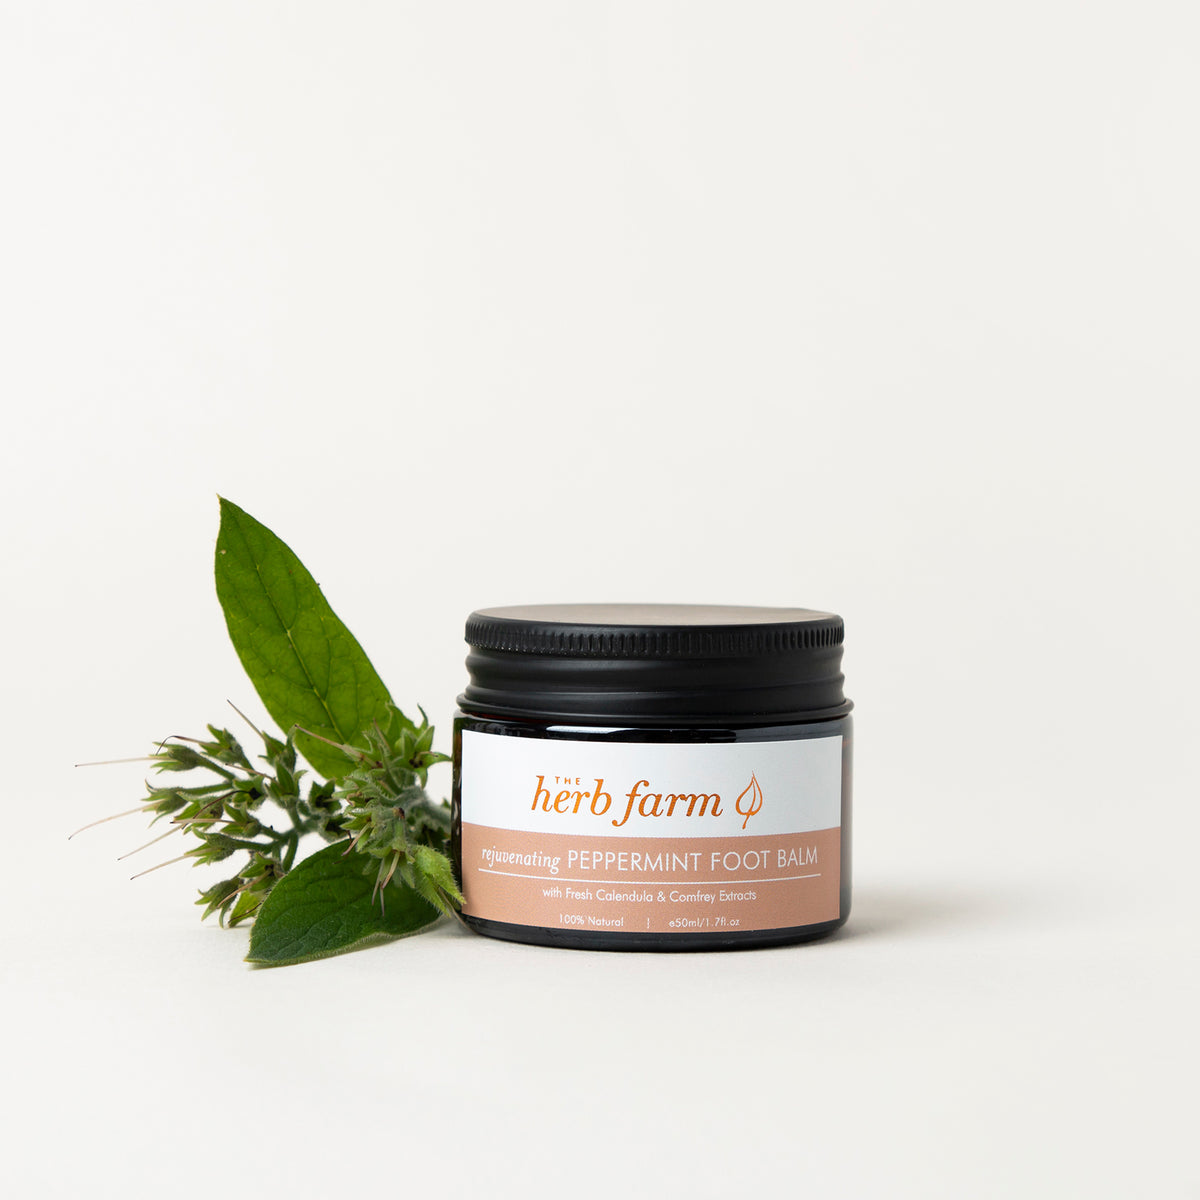 Rejuvenating Peppermint Foot Balm primary